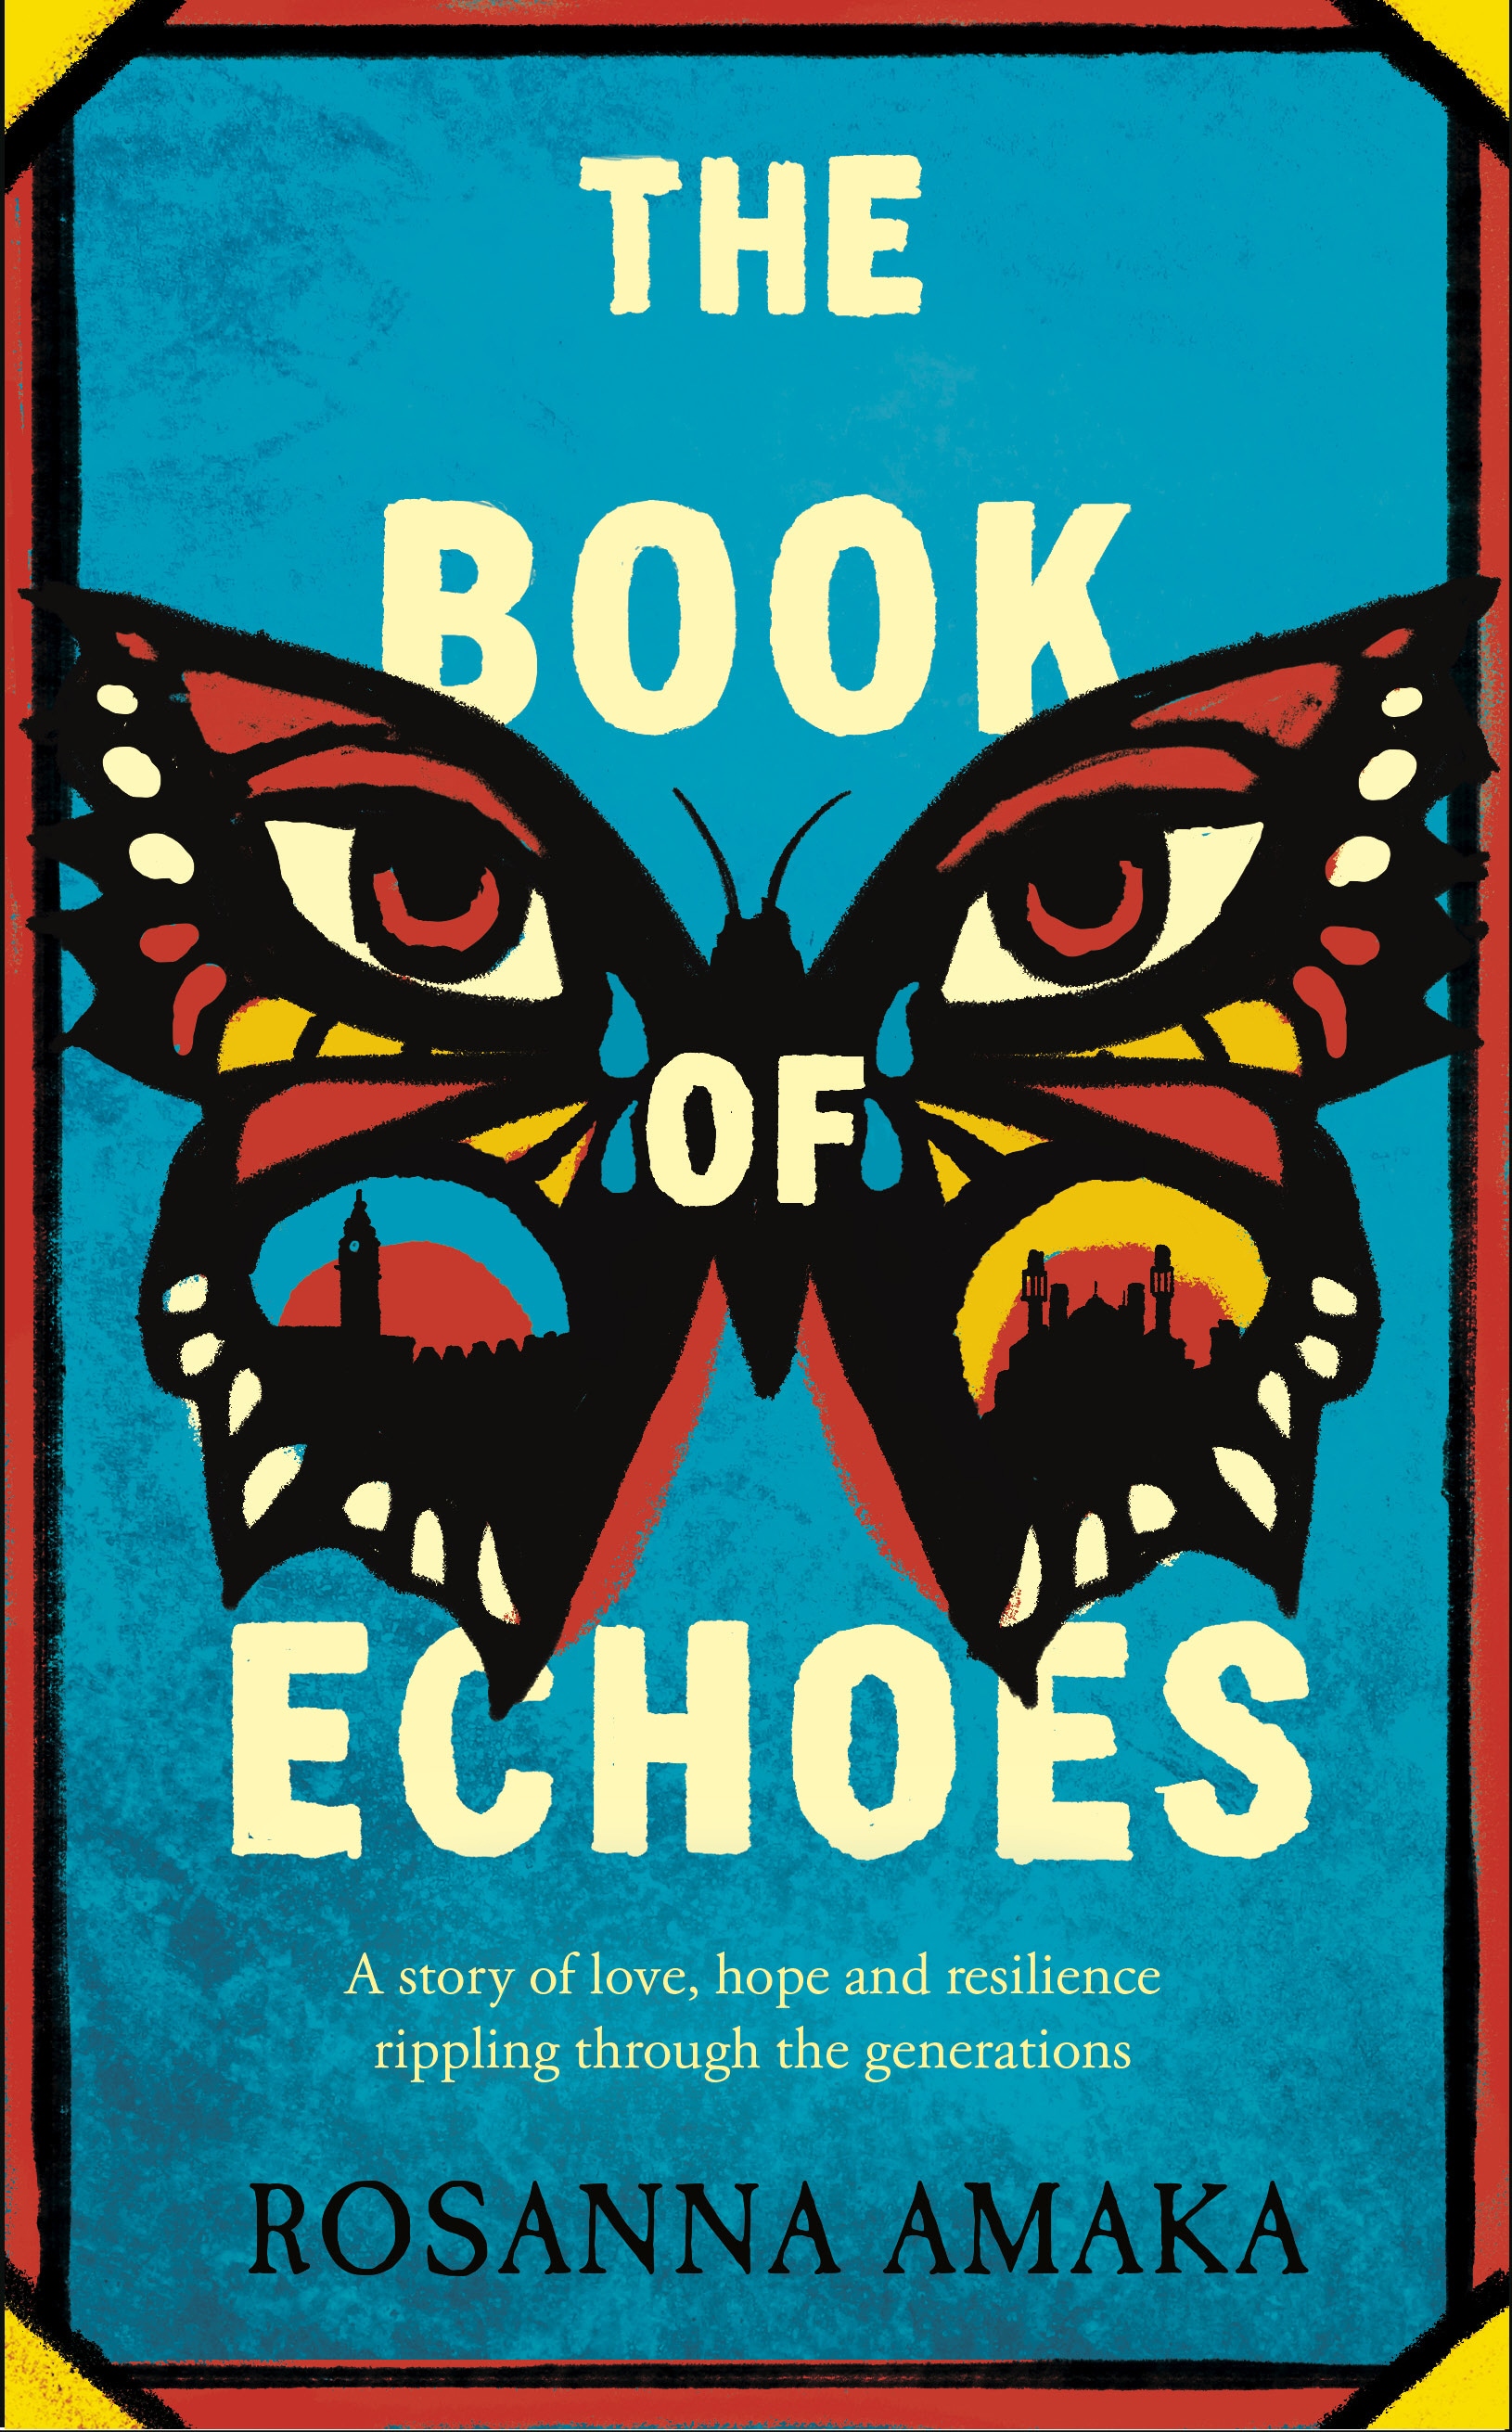 Book “The Book Of Echoes” by Rosanna Amaka — February 27, 2020